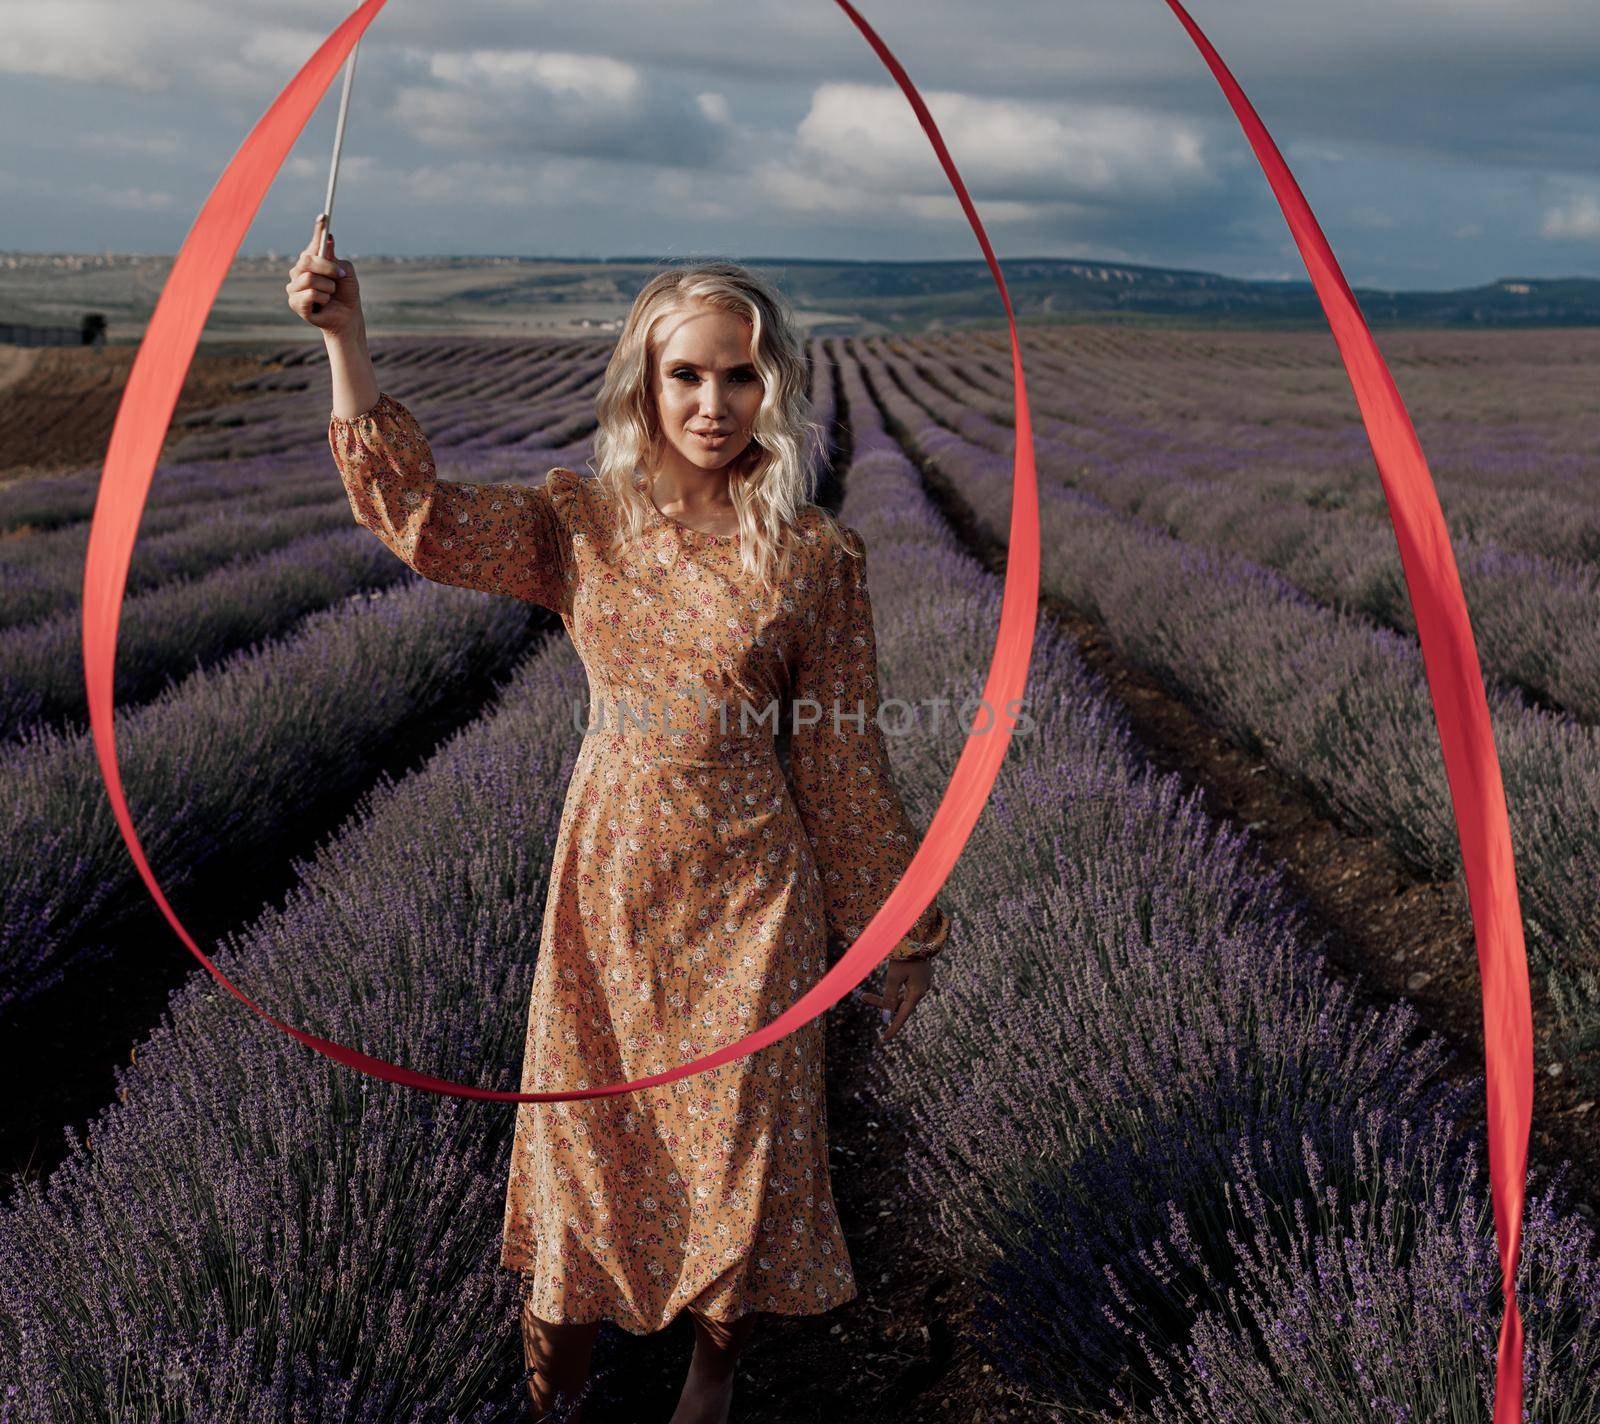 Fashion portrait of a pretty young woman in lavender field by splash